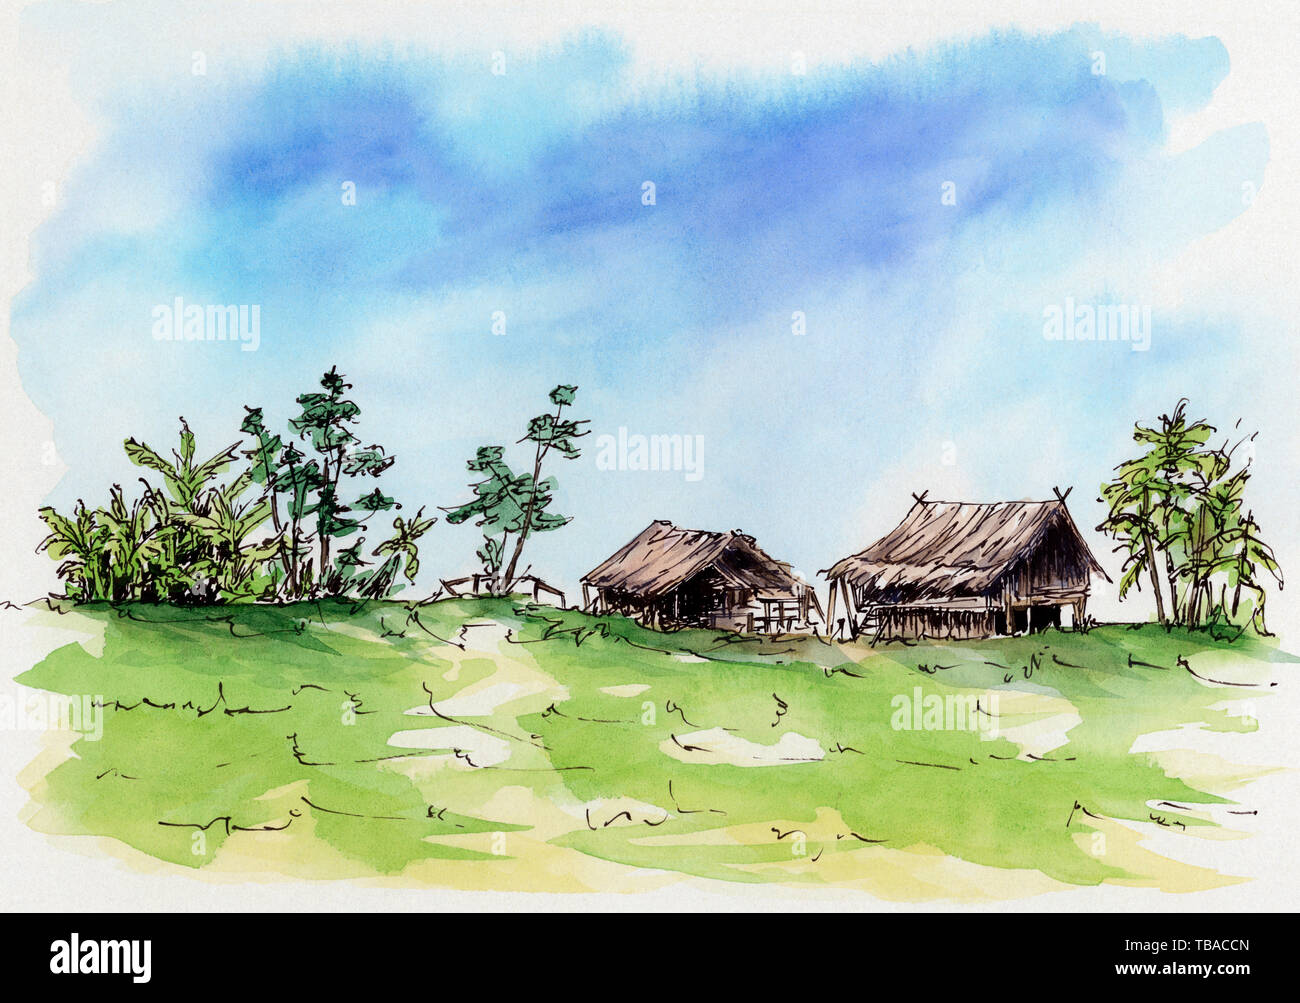 Thai village. Loose sketch. Ink and watercolor on cardboard. Stock Photo